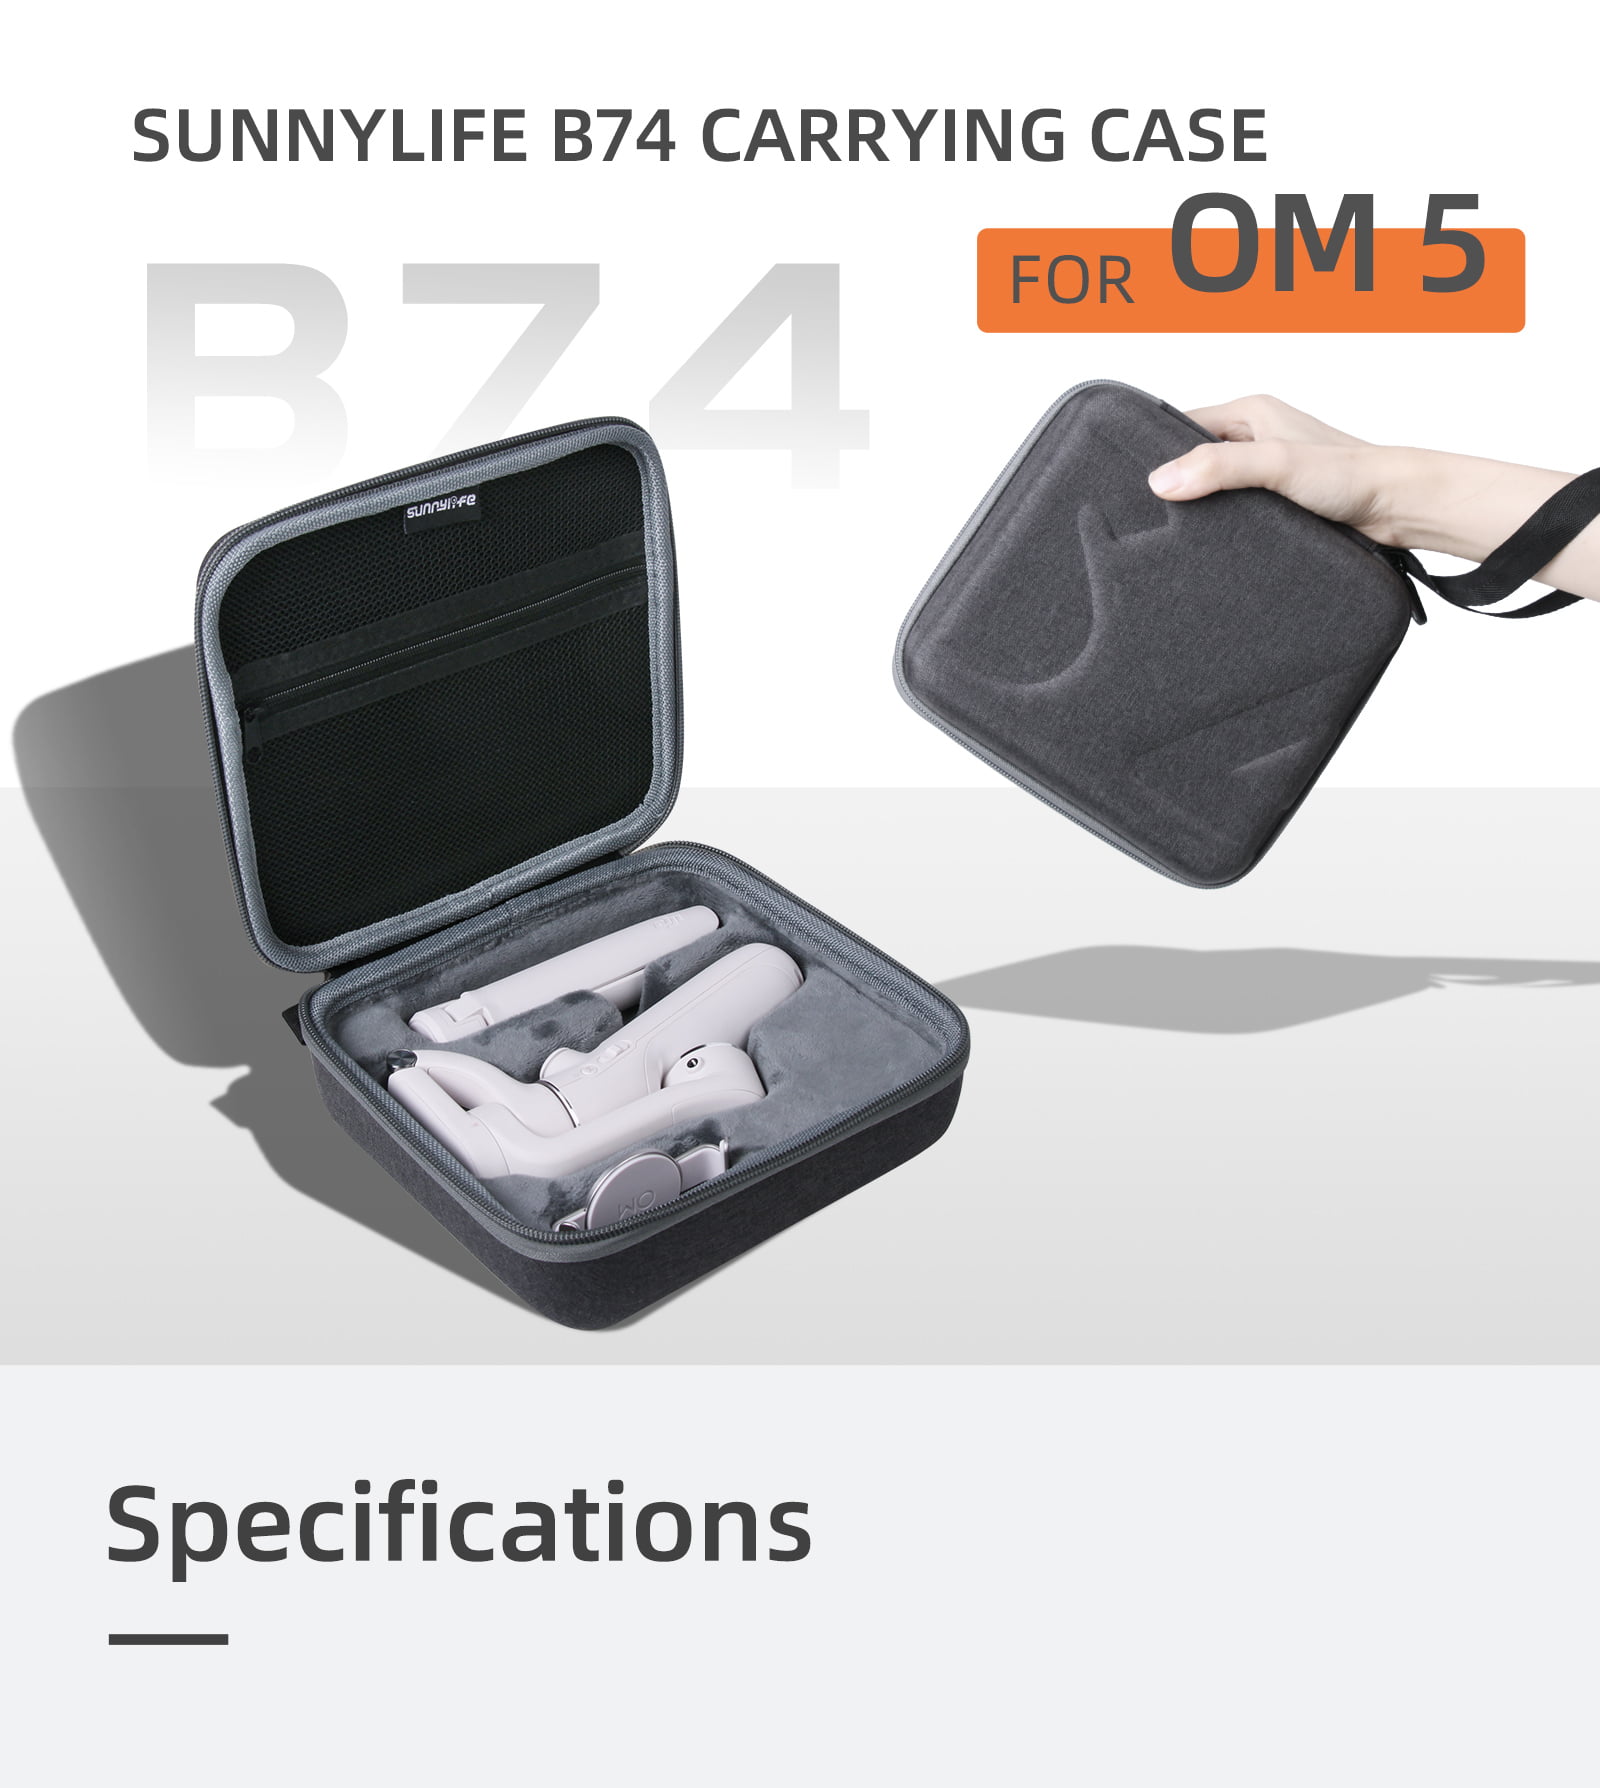 Portable Bag Travel Carry Case Storage For DJI OM 5 OSMO Mobile 5 Gimbal Tripod 